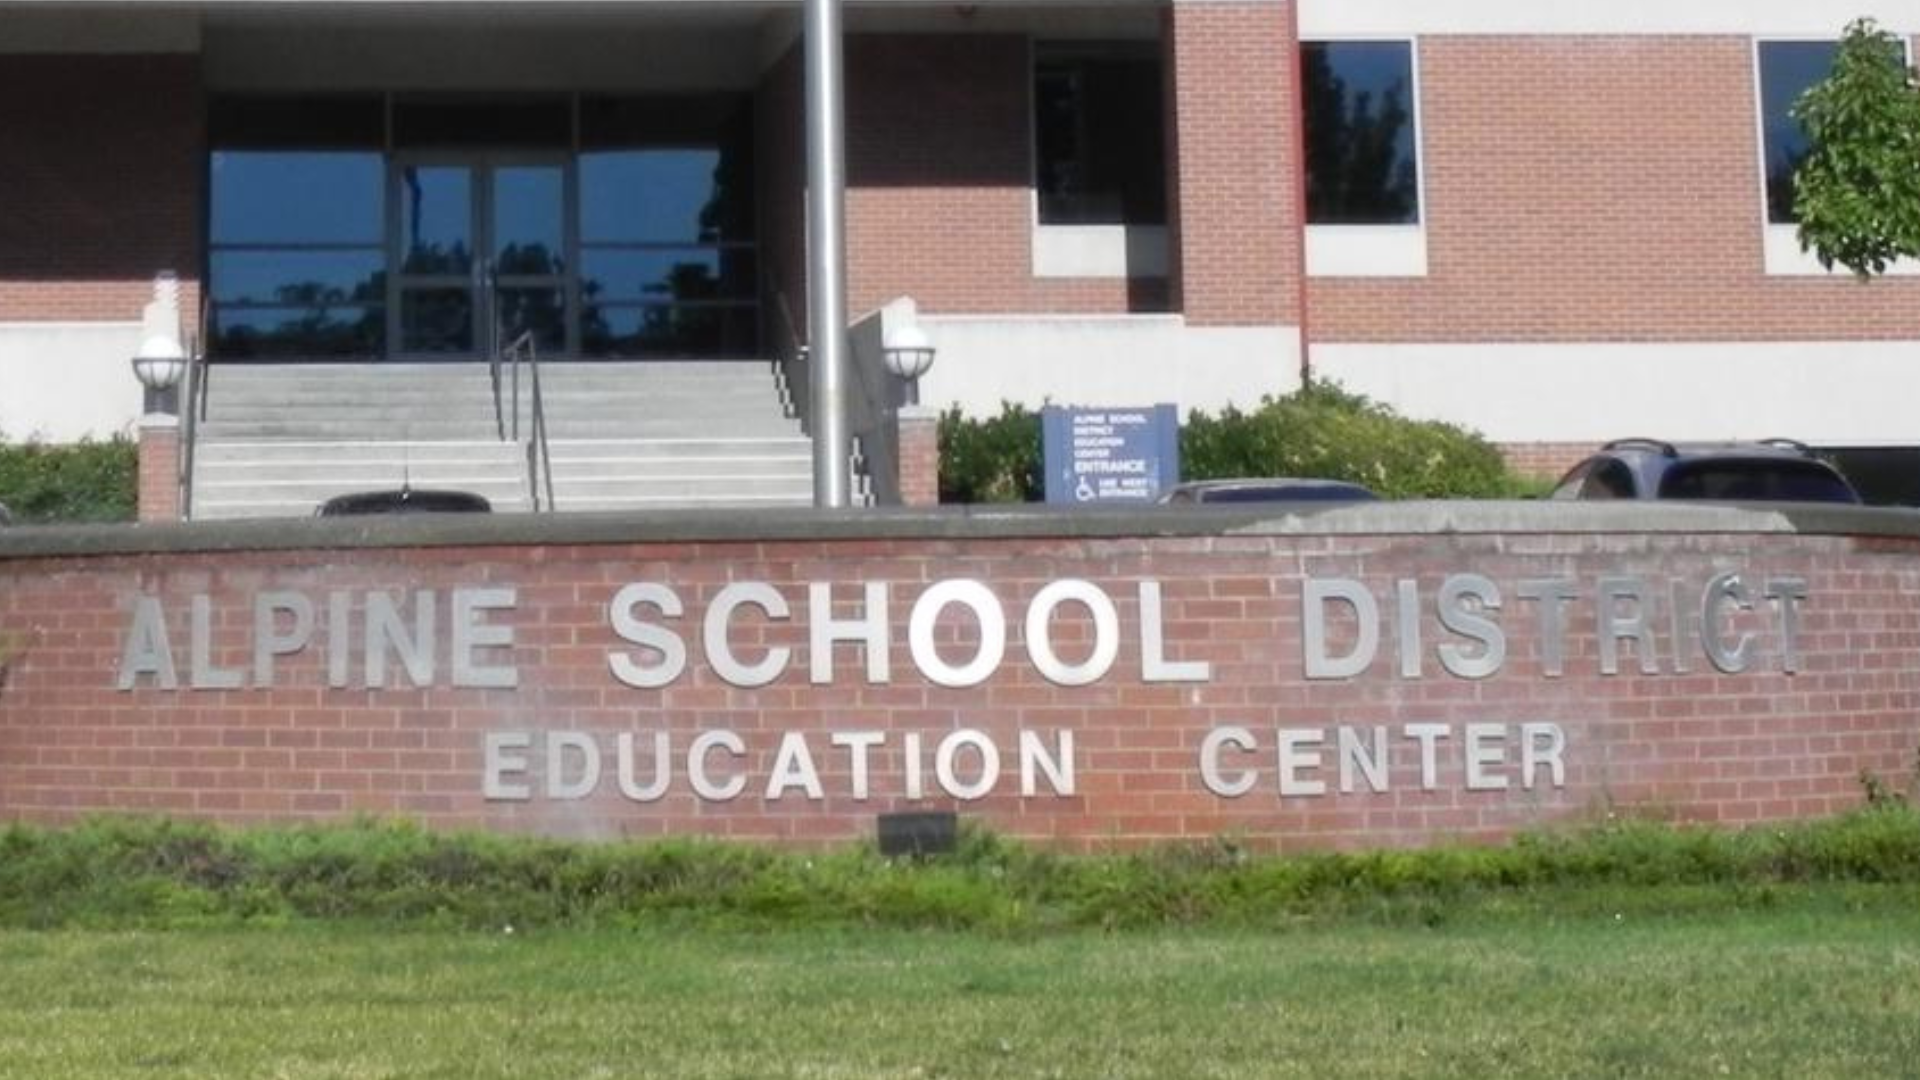 The Alpine School District Board of Education launched a formal study to potentially close schools ...